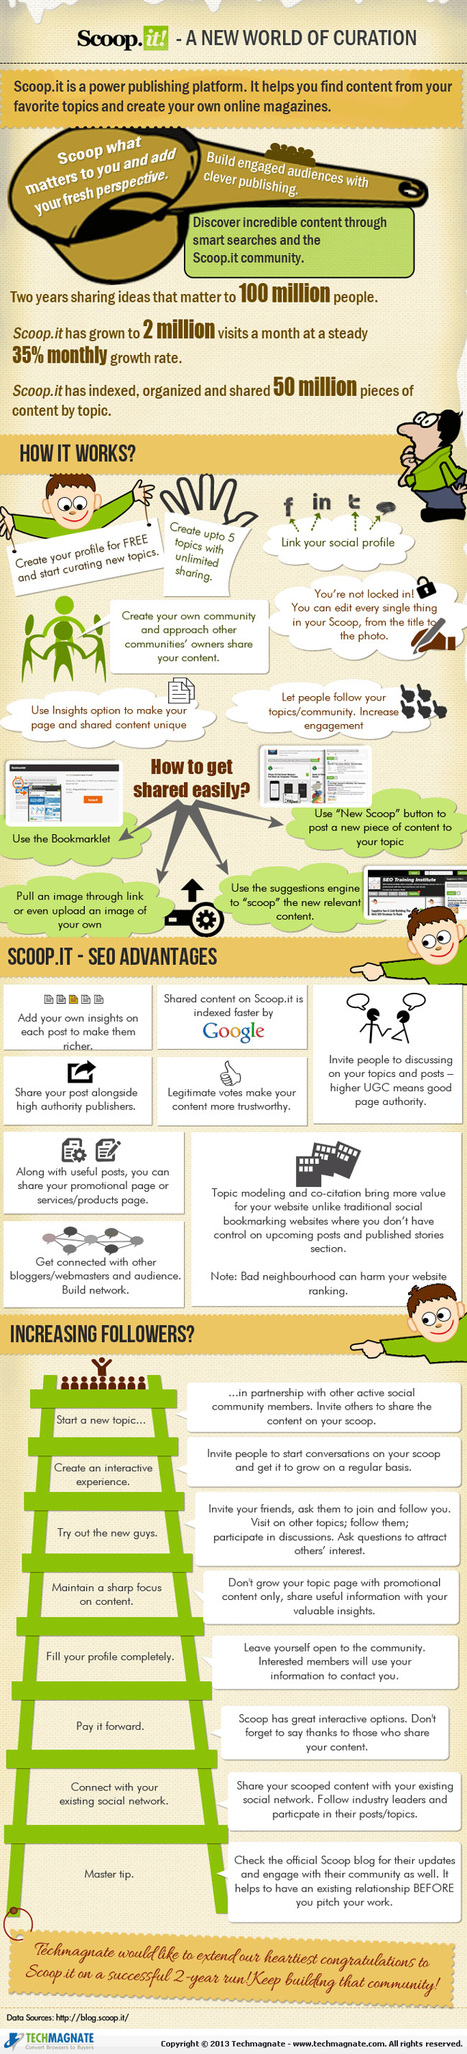 Scoop.It for SEO – A New World of Curation [Infographic] | Create, Innovate & Evaluate in Higher Education | Scoop.it